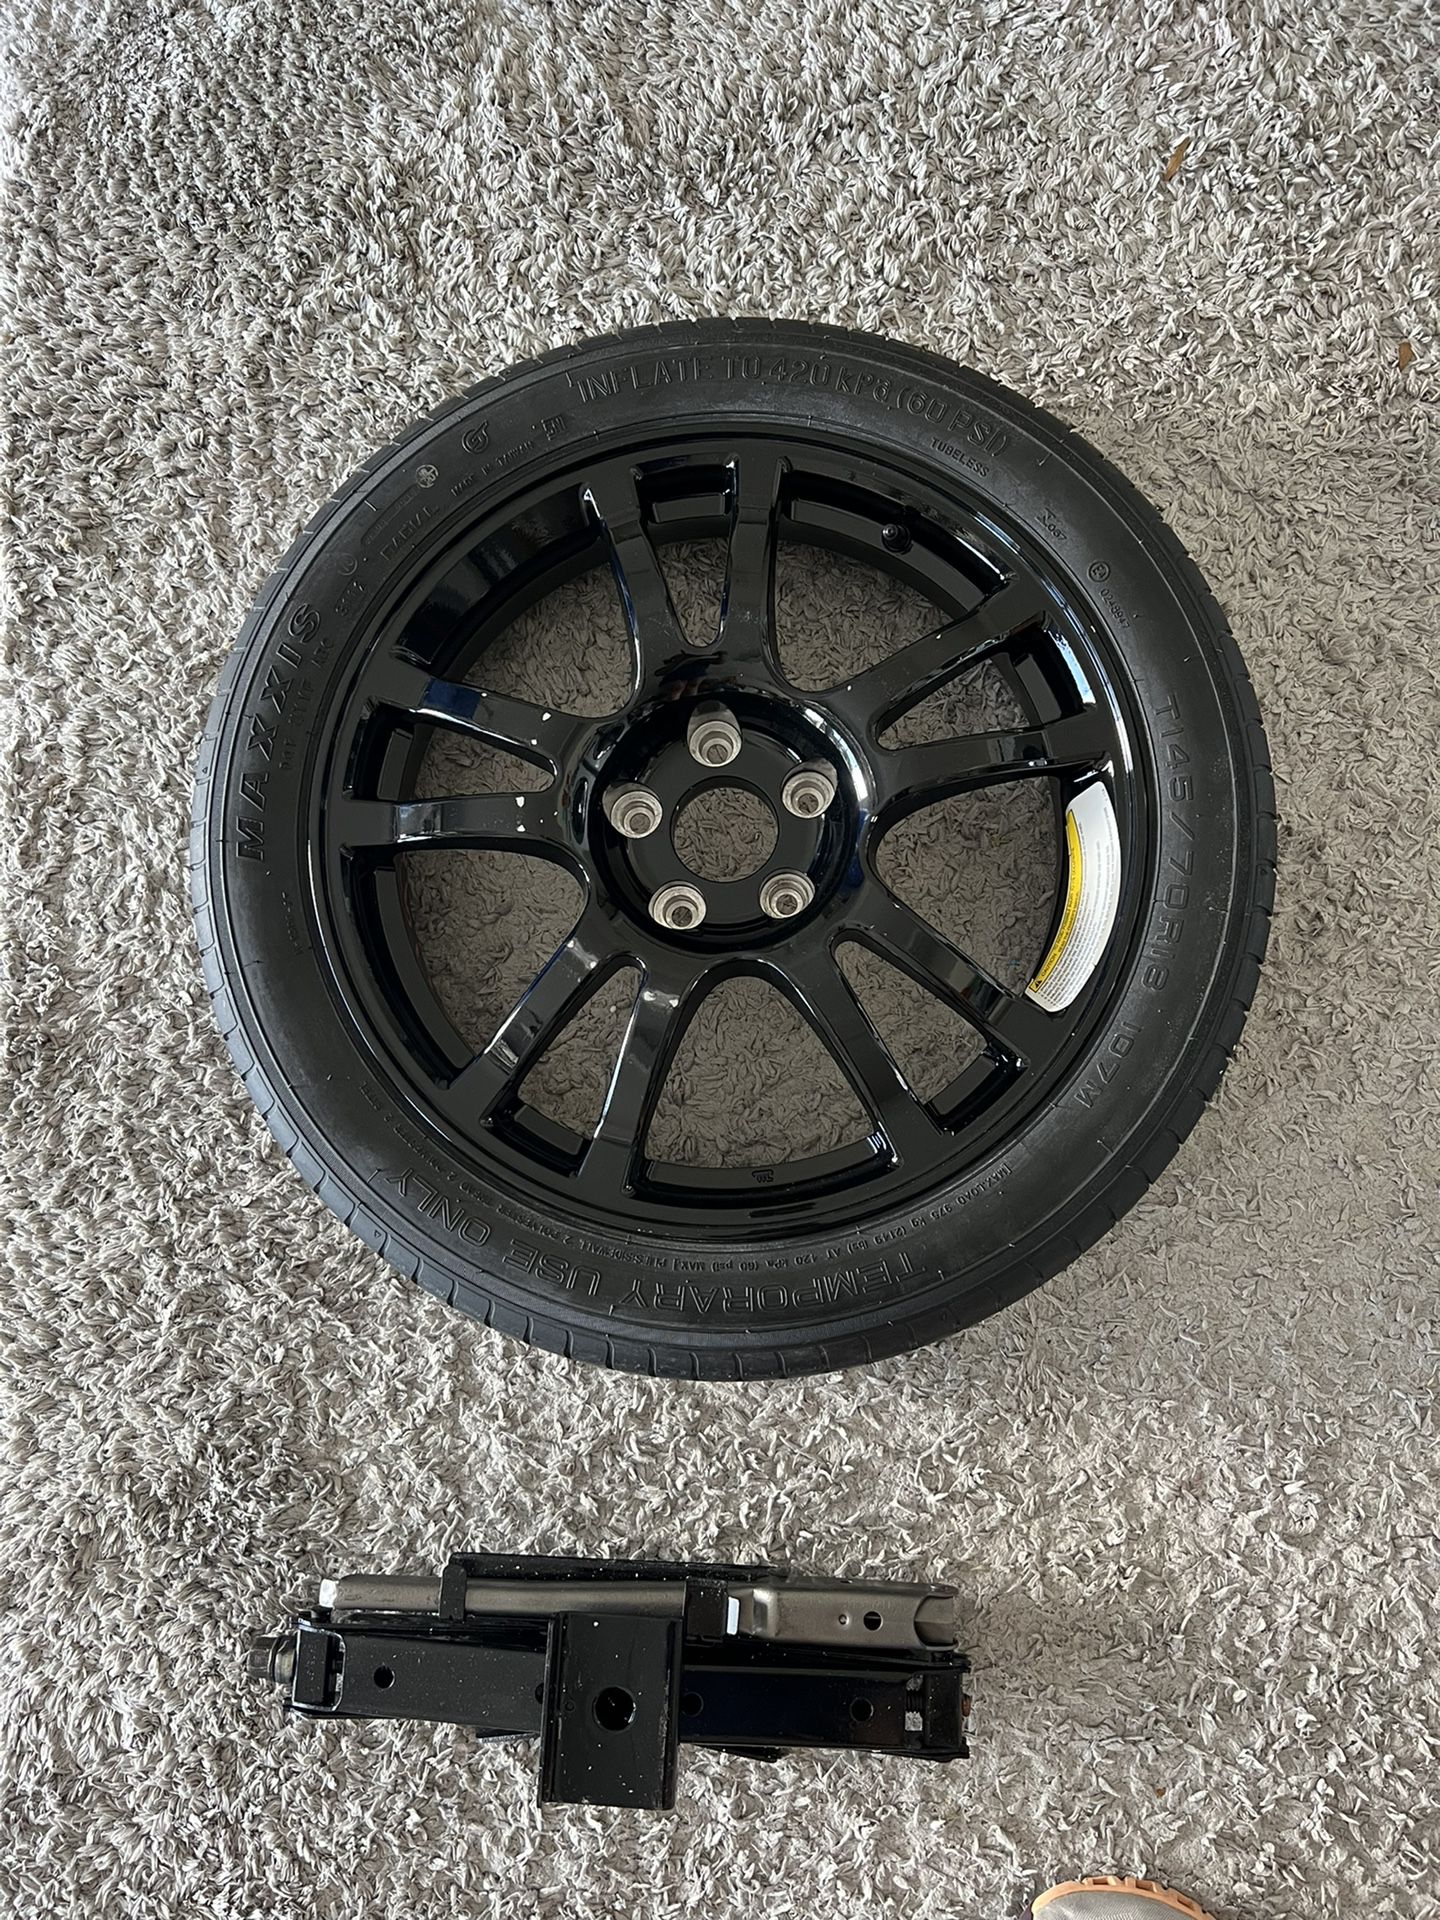 Nissan / Infiniti SPARE TIRE with Jack - Never Used. 